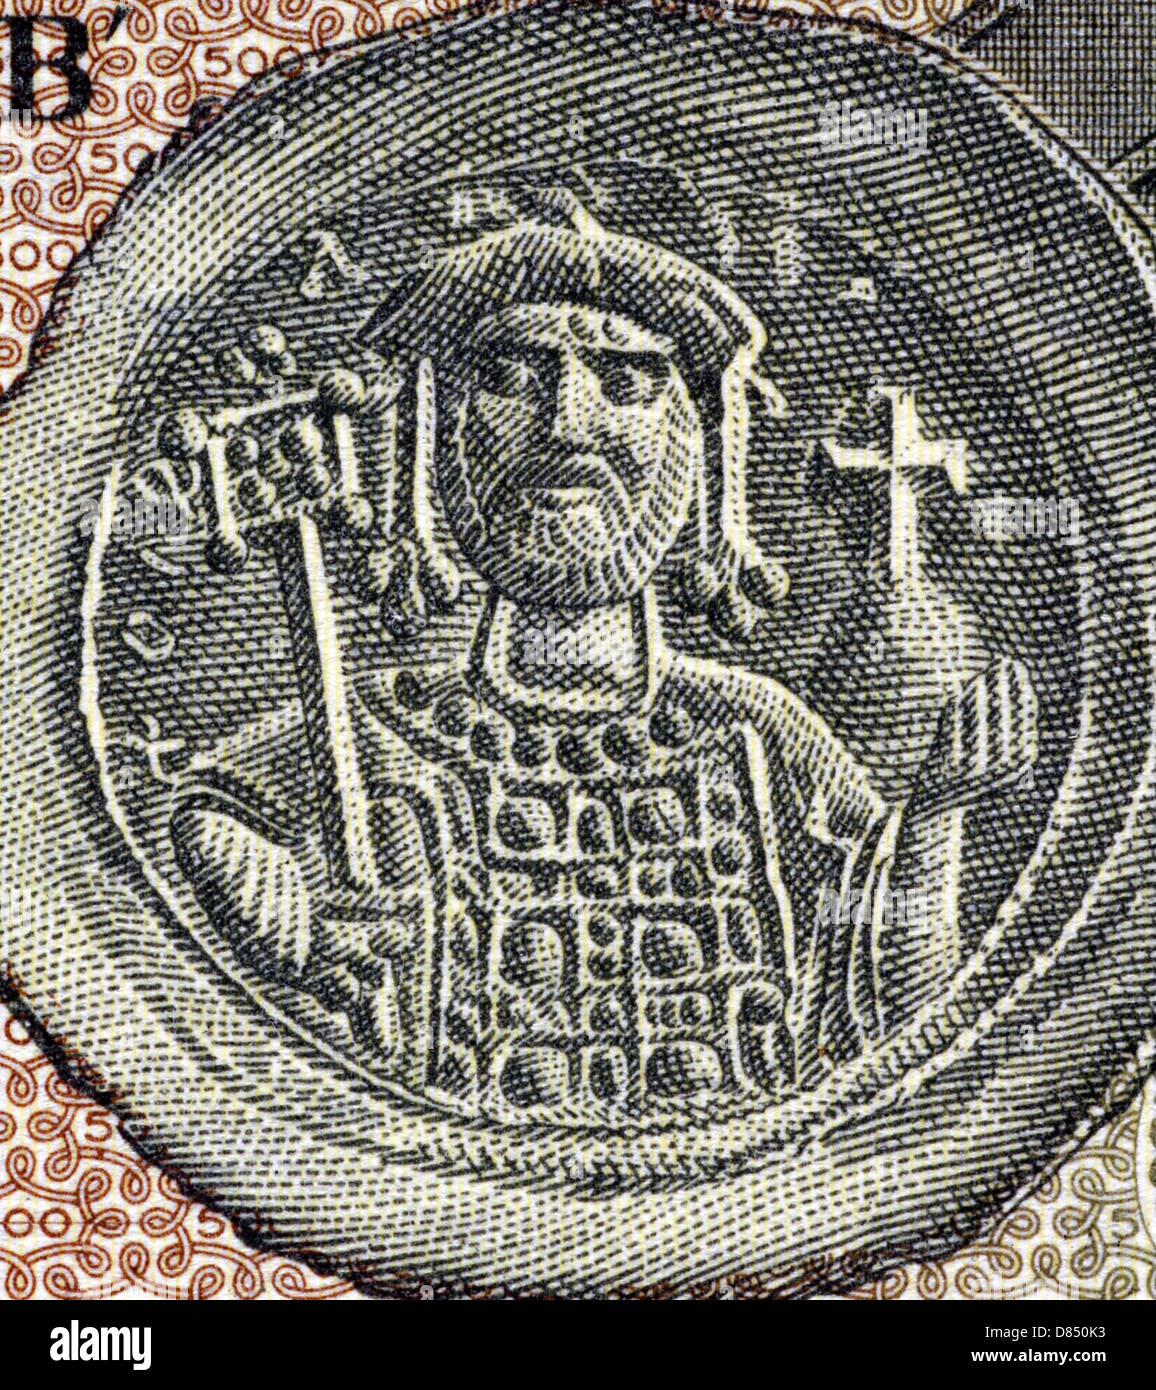 Justinian I (482-565) on 500 Drachmai 1953 Banknote from Greece. Byzantine Emperor during 527-565. Stock Photo